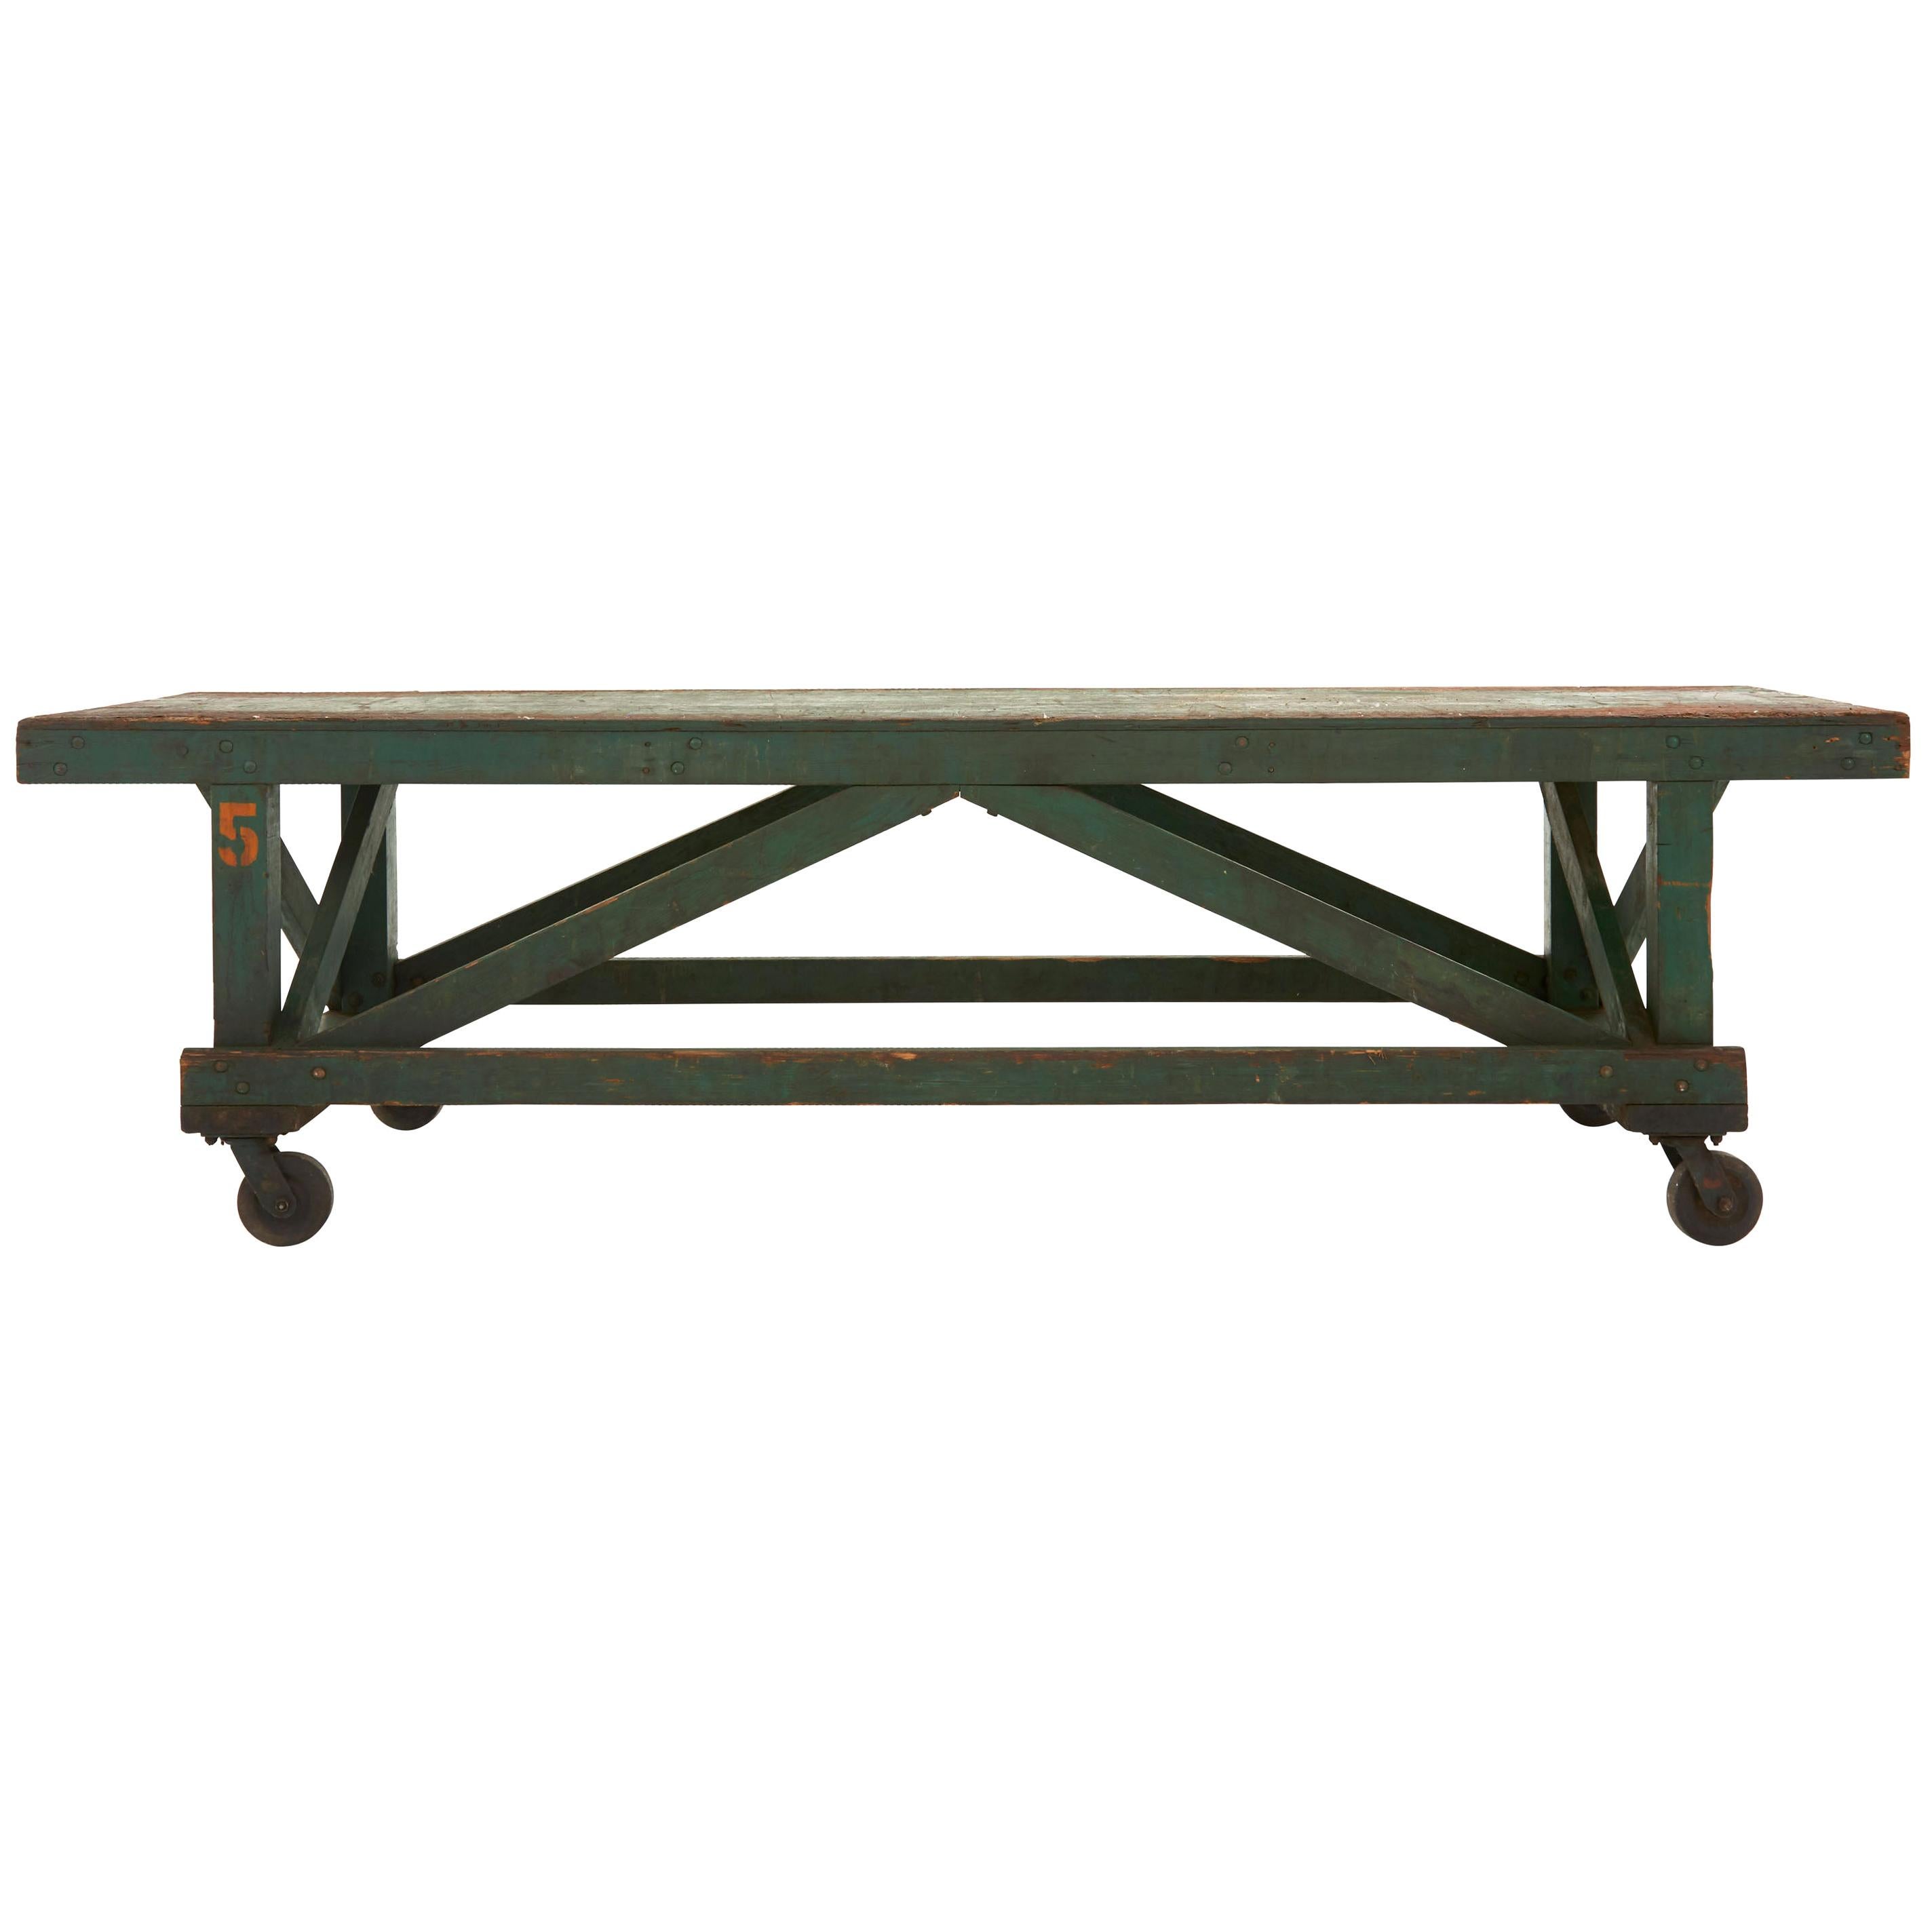 Green Painted Industrial Wooden Work Table